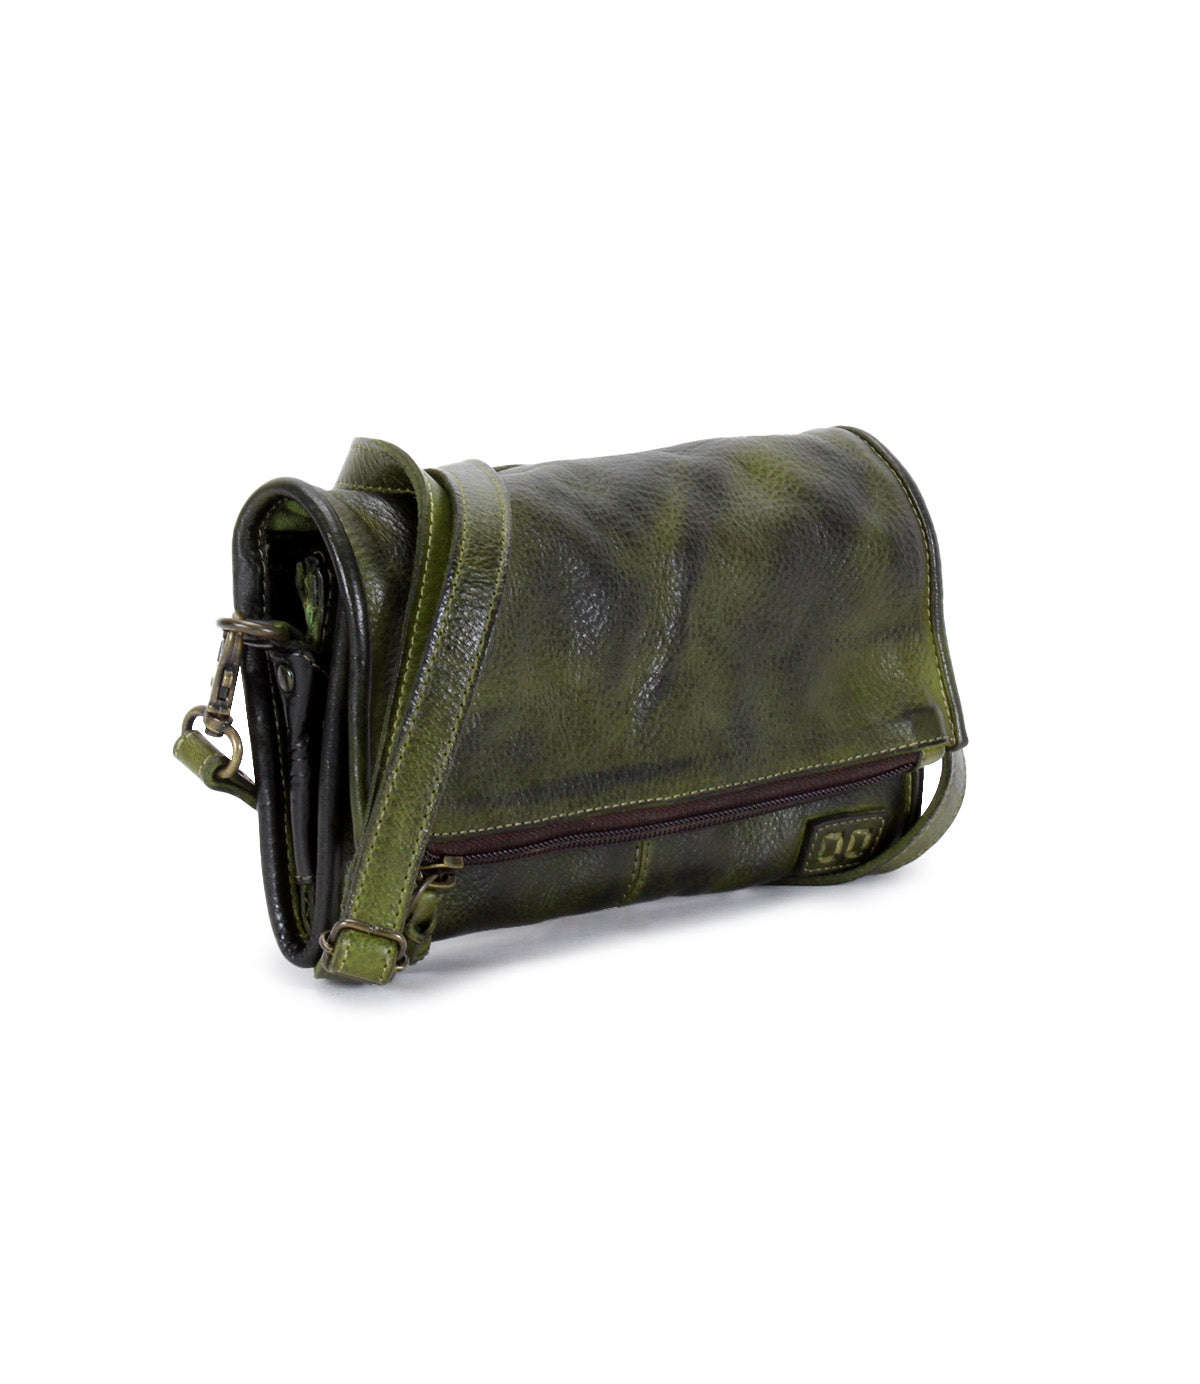 A green leather Amina cross body bag by Bed Stu with a zipper.